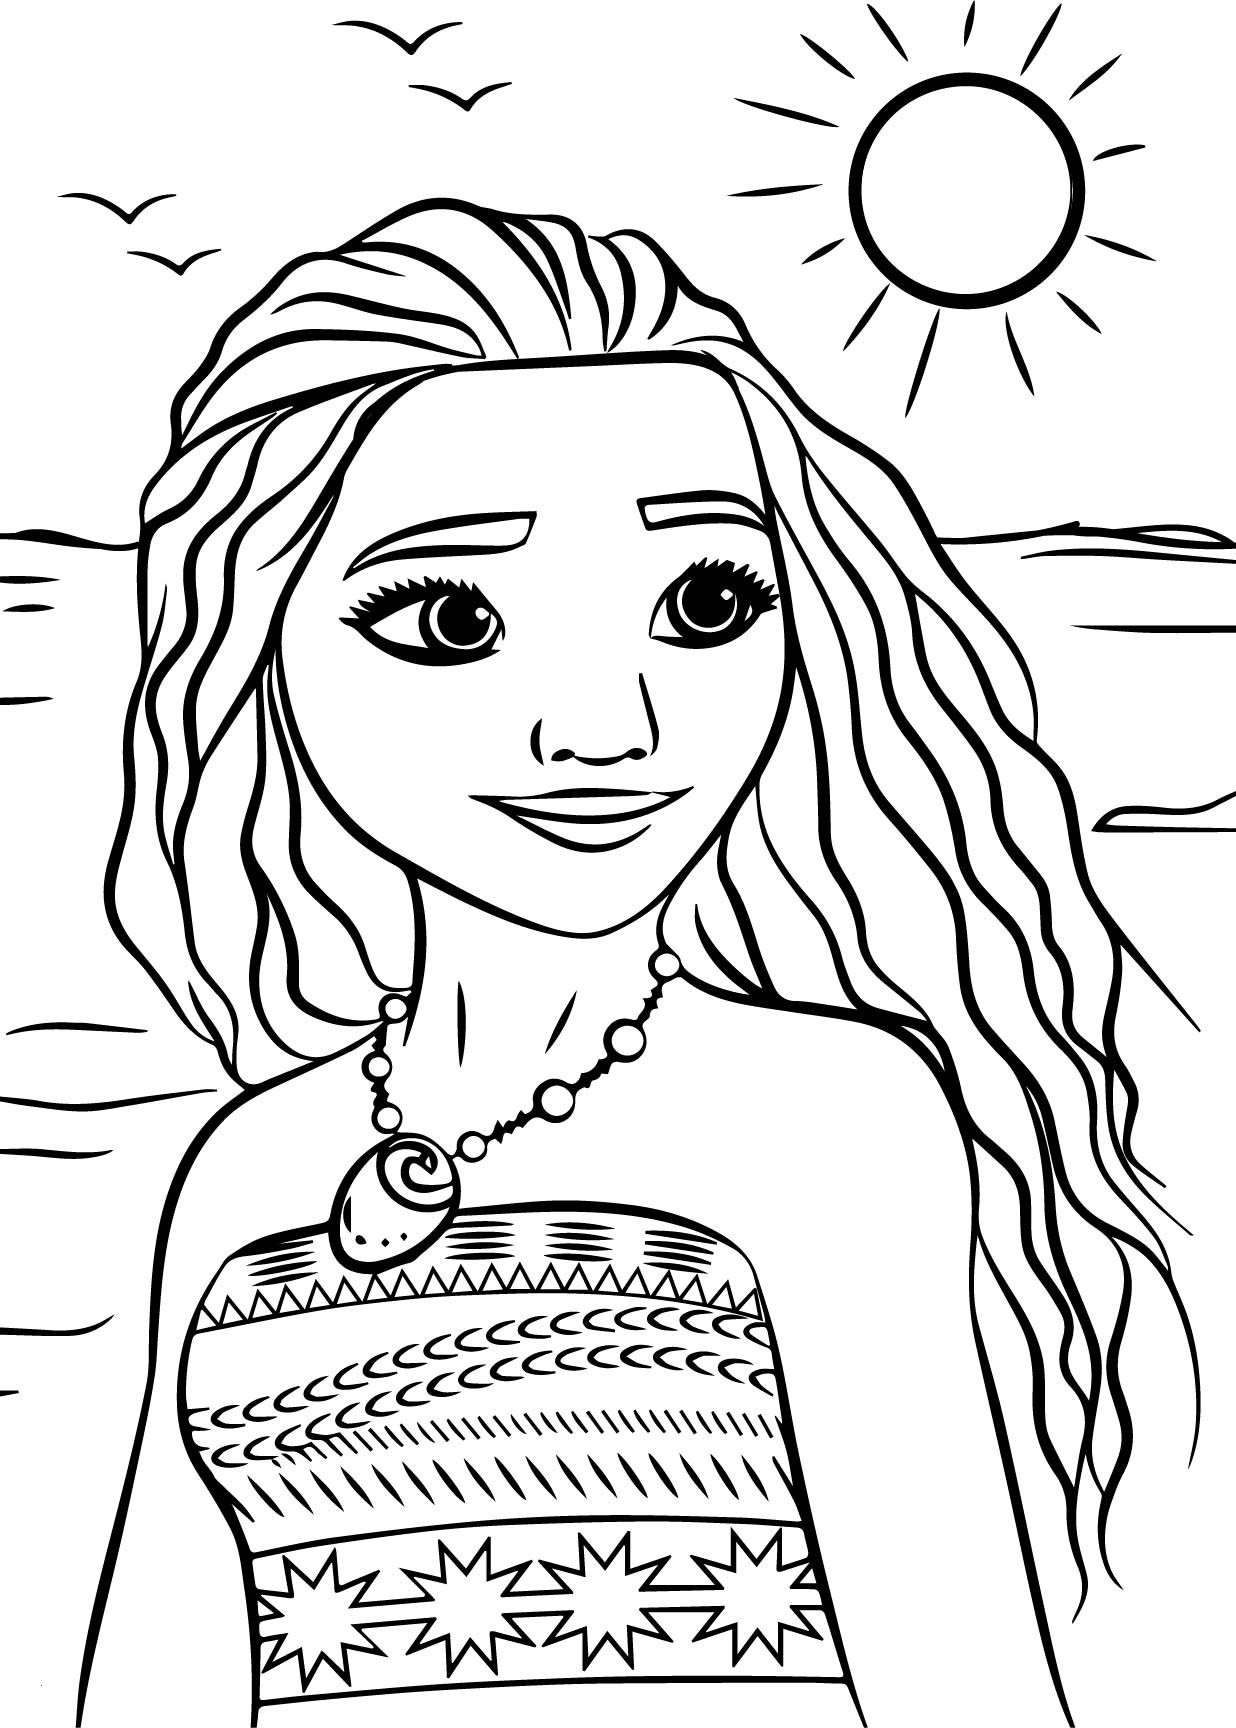 Coloring Book : Barbie Princess Coloring Pages To Print ...